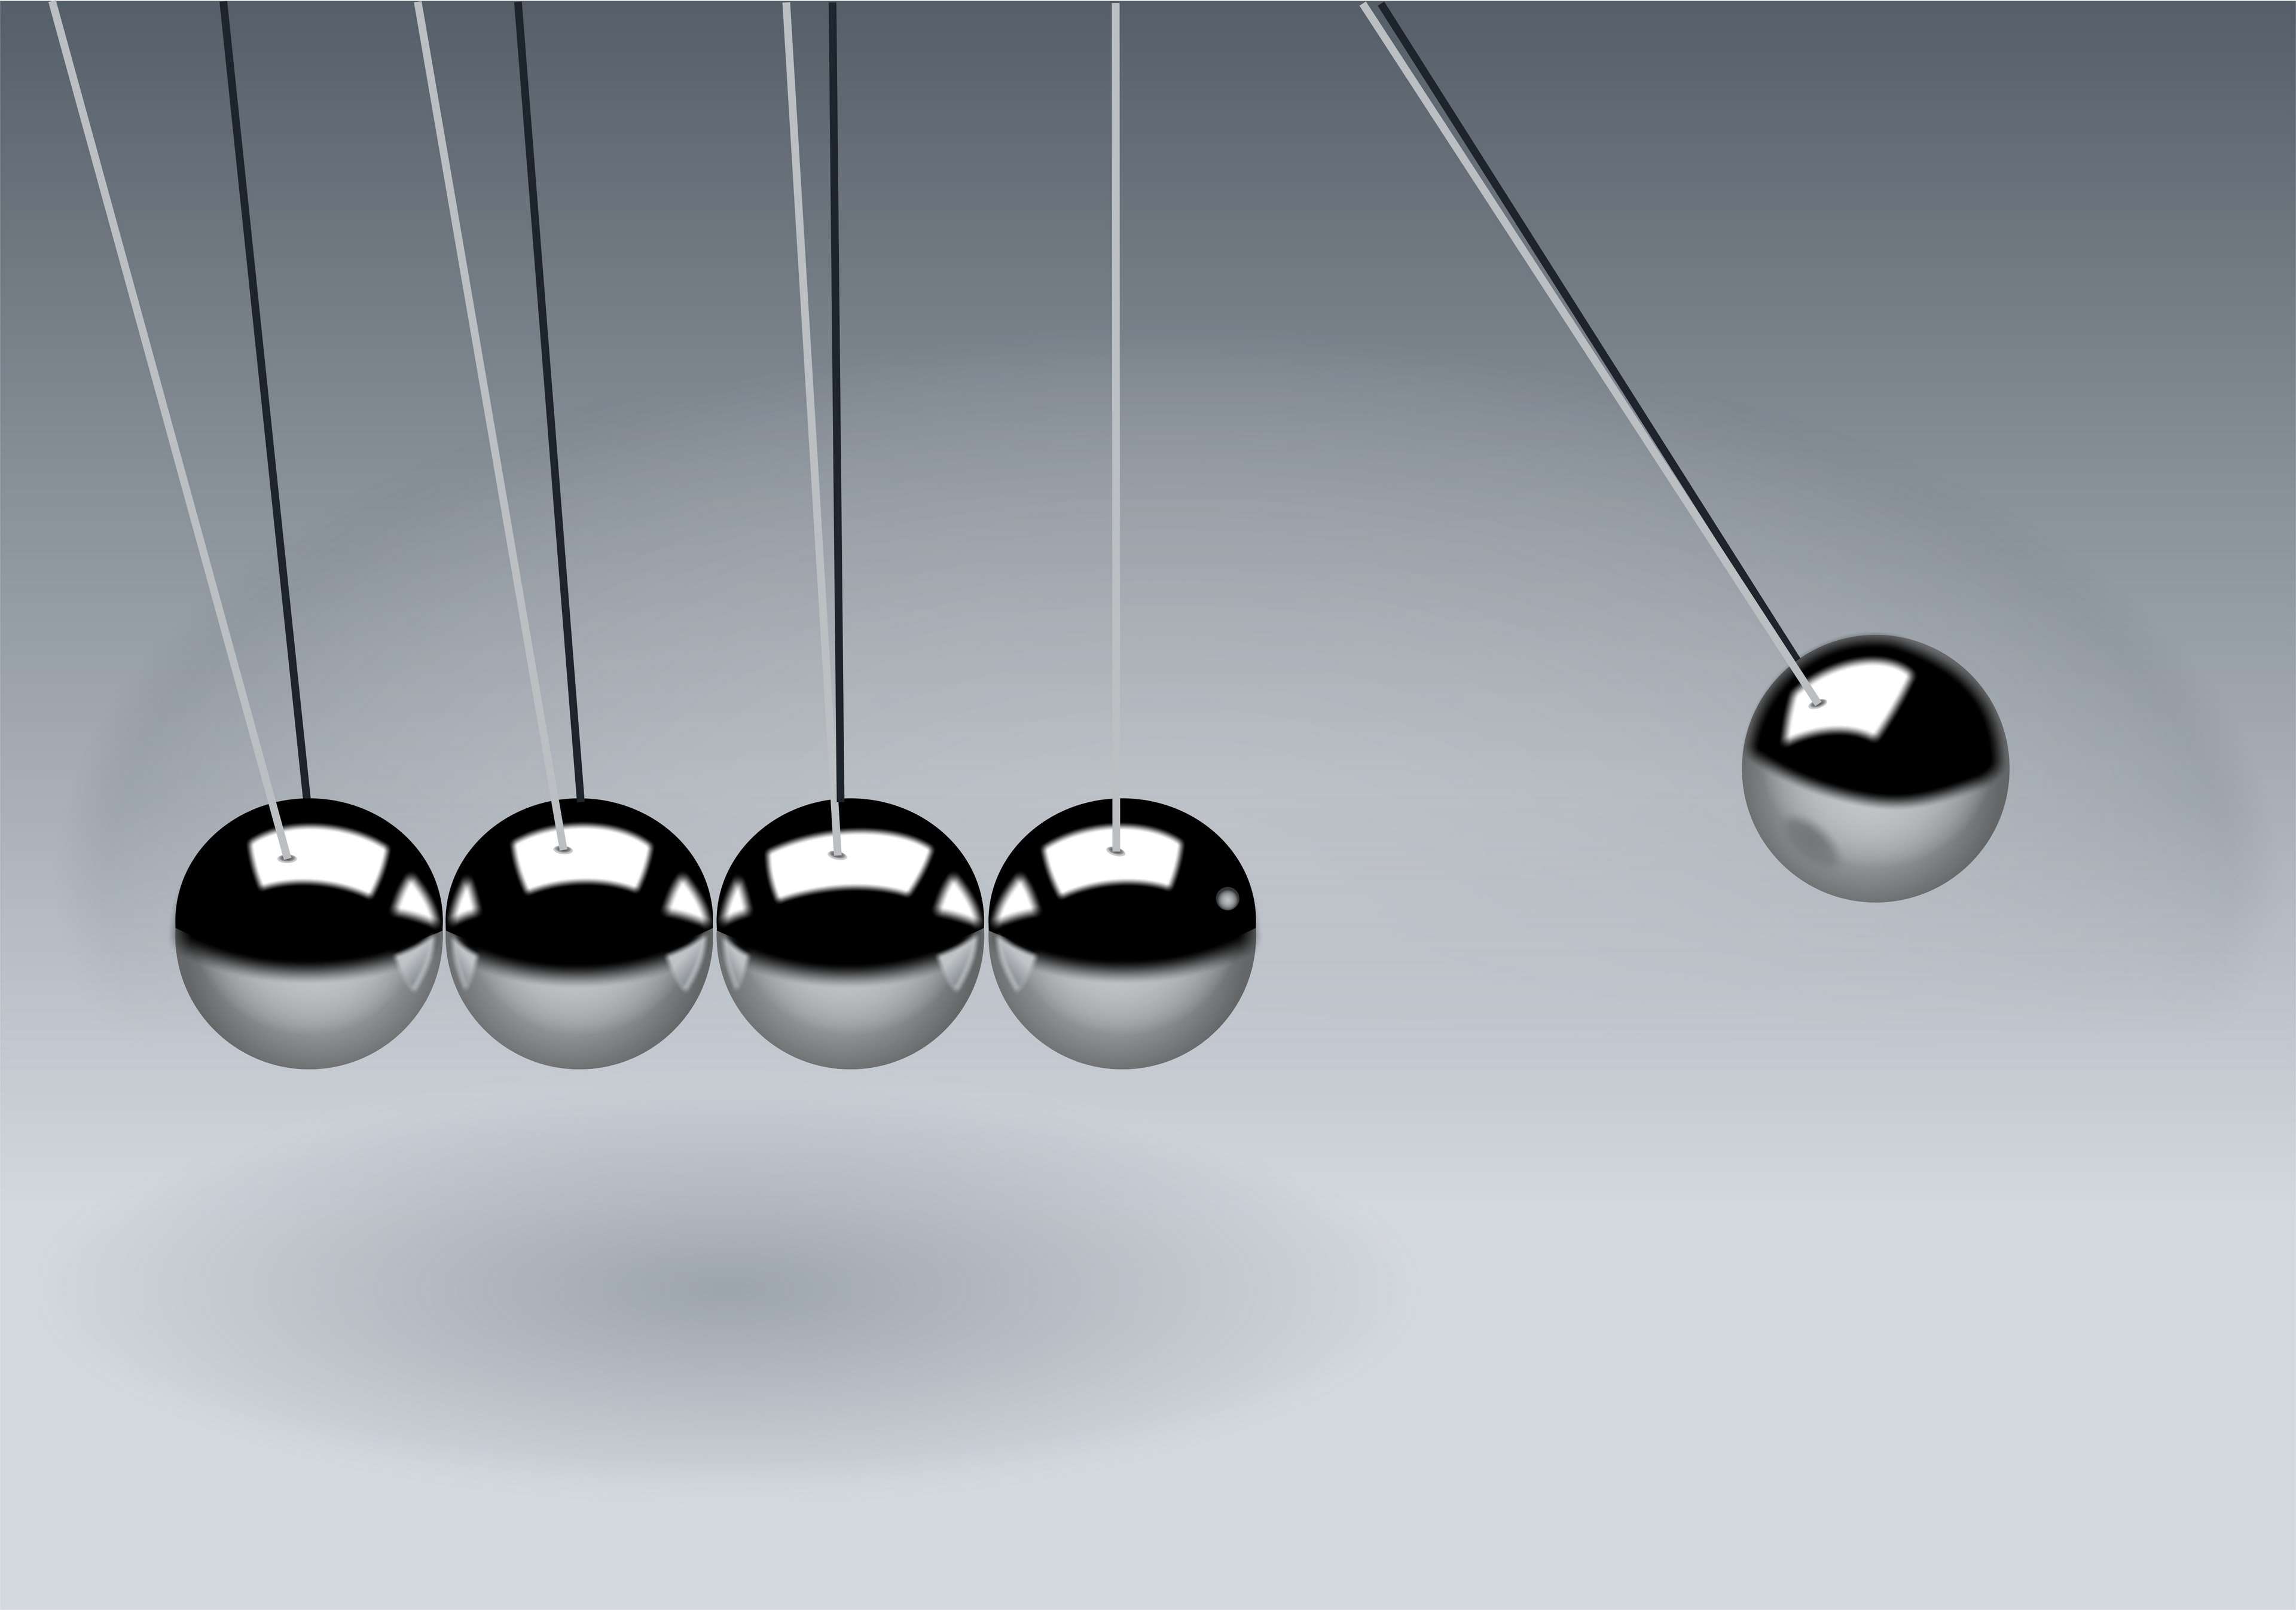 action, balls, black and white, illustration, motion, newtons cradle